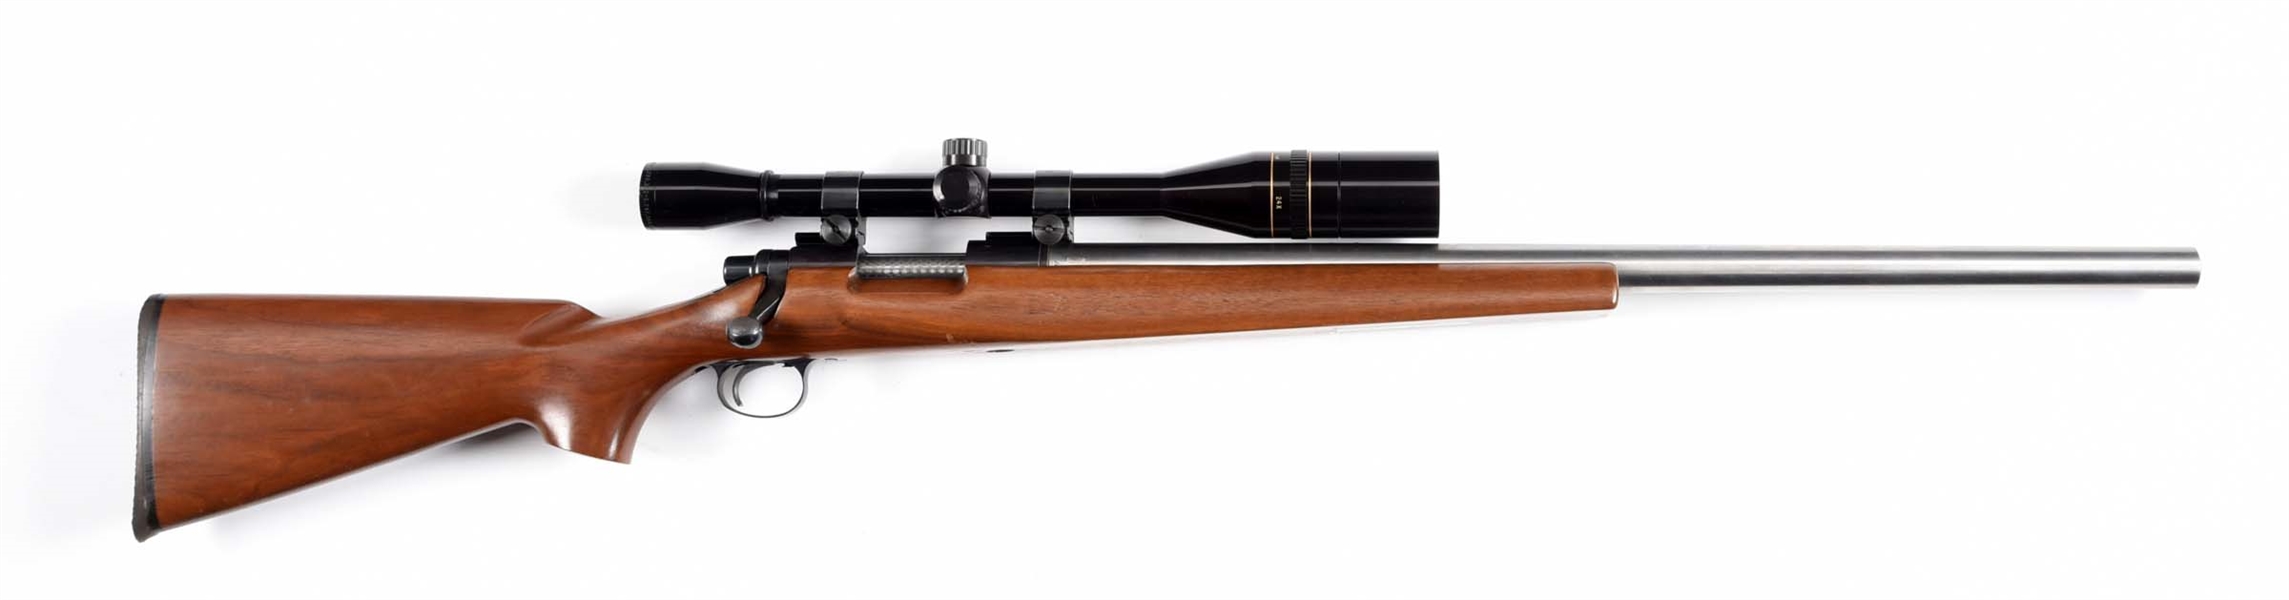 (M) REMINGTON 40XBR BOLT ACTION TARGET RIFLE WITH LEUPOLD 24X SCOPE.